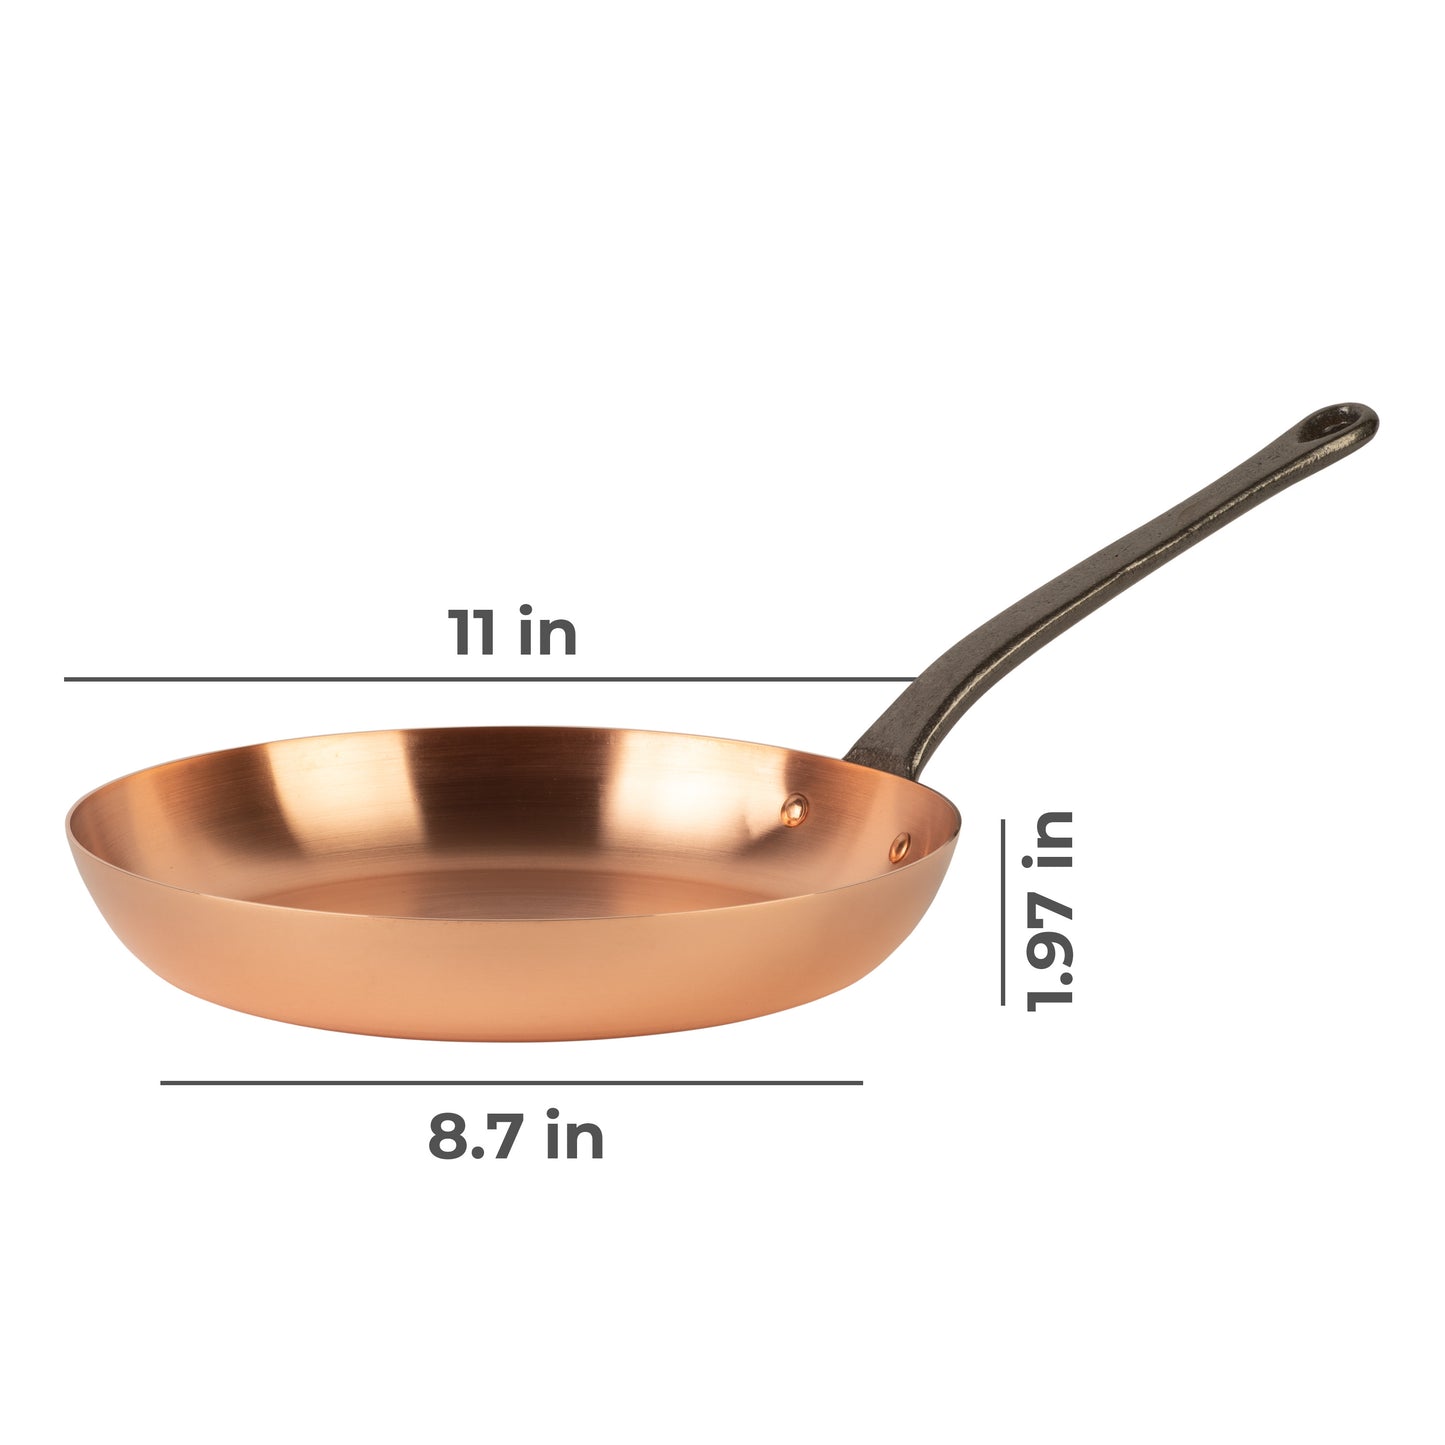 Pure copper frying pan without coating, Ø 11 in